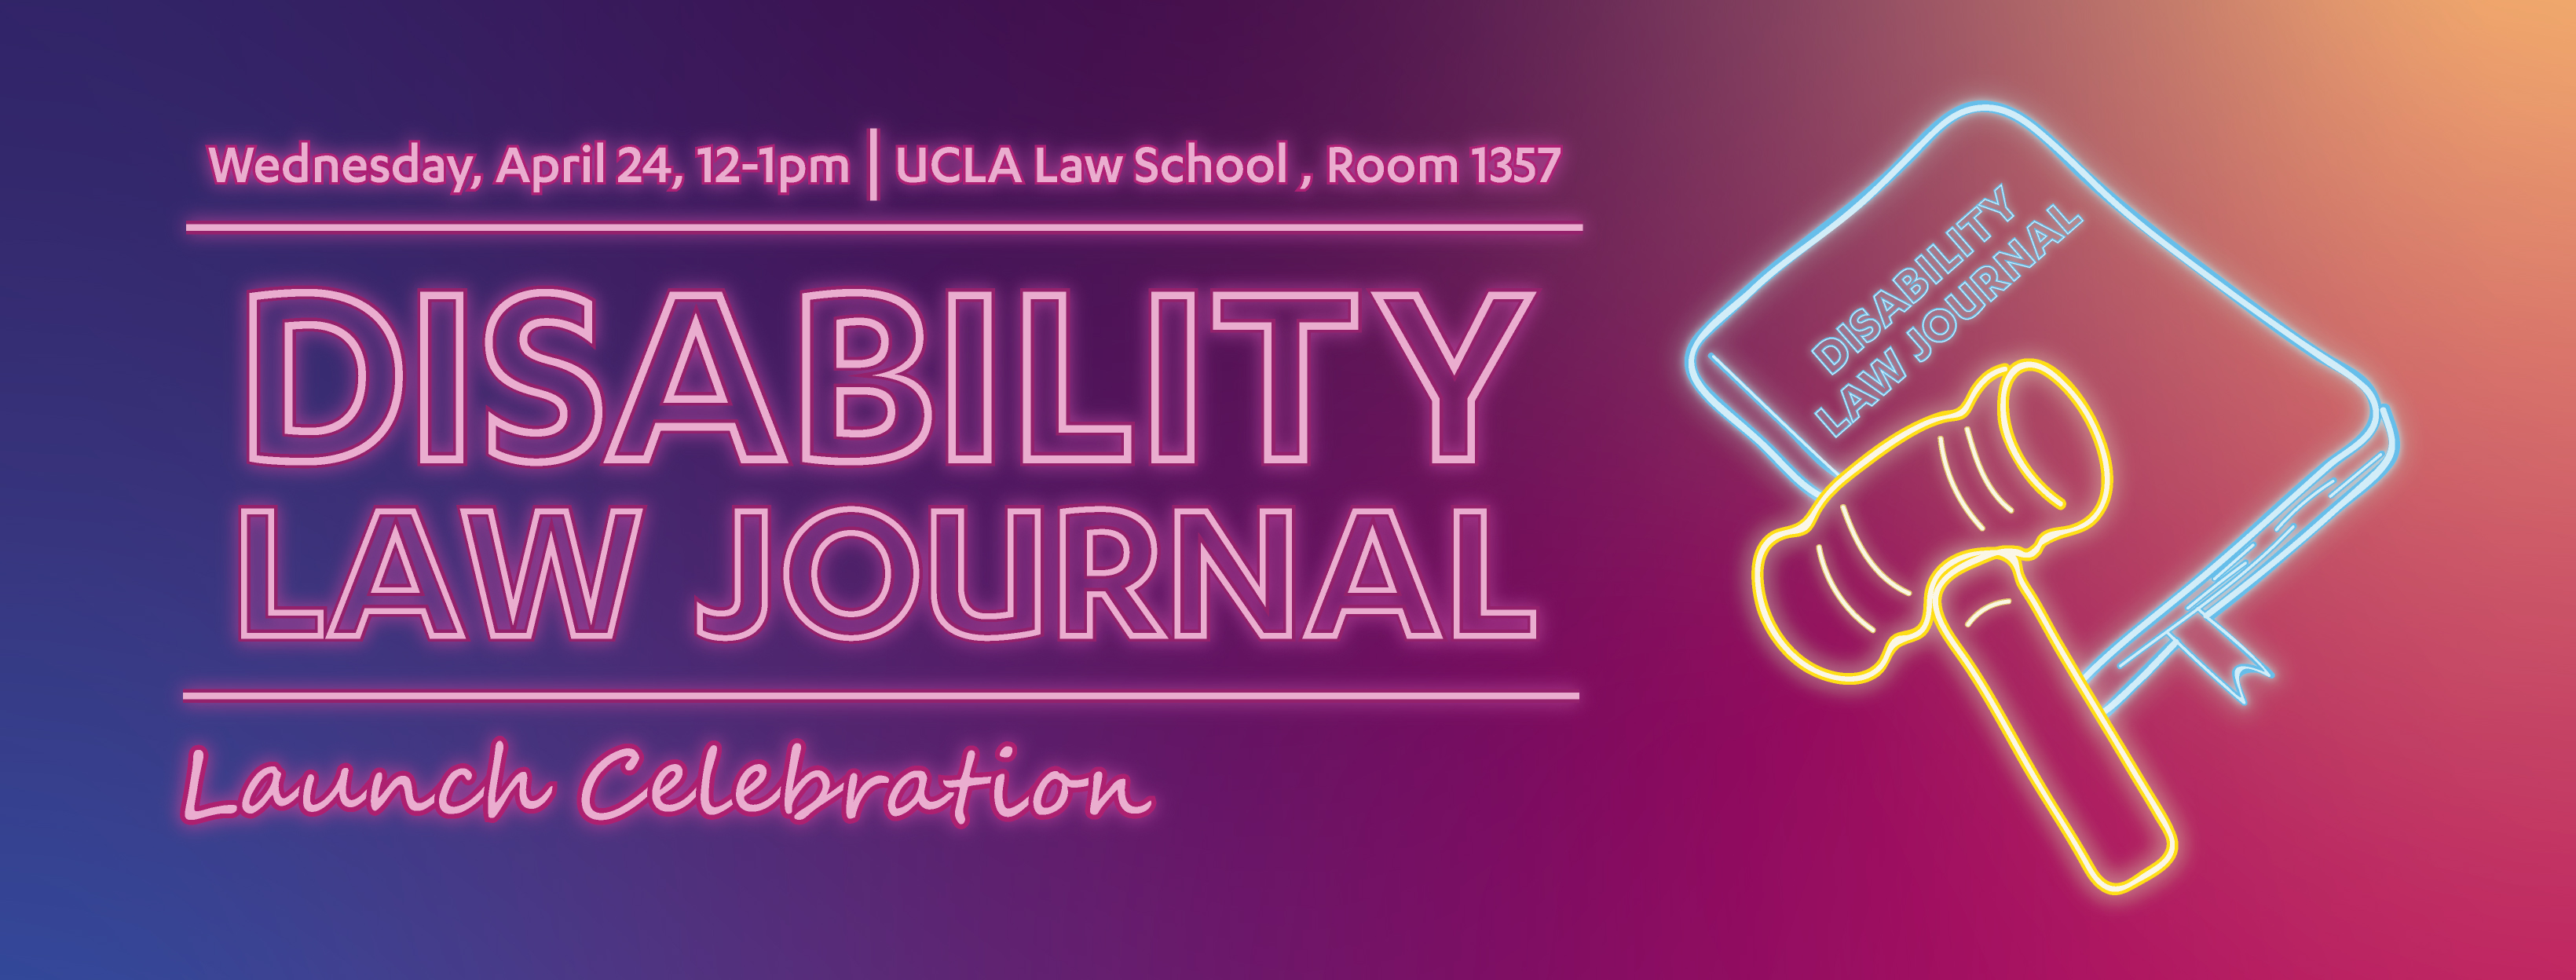 Picture of a journal and a gavel with the following text: Wednesday, April 24, 12-1pm, UCLA Law School, Room 1357, Disability Law Journal Launch Celebration